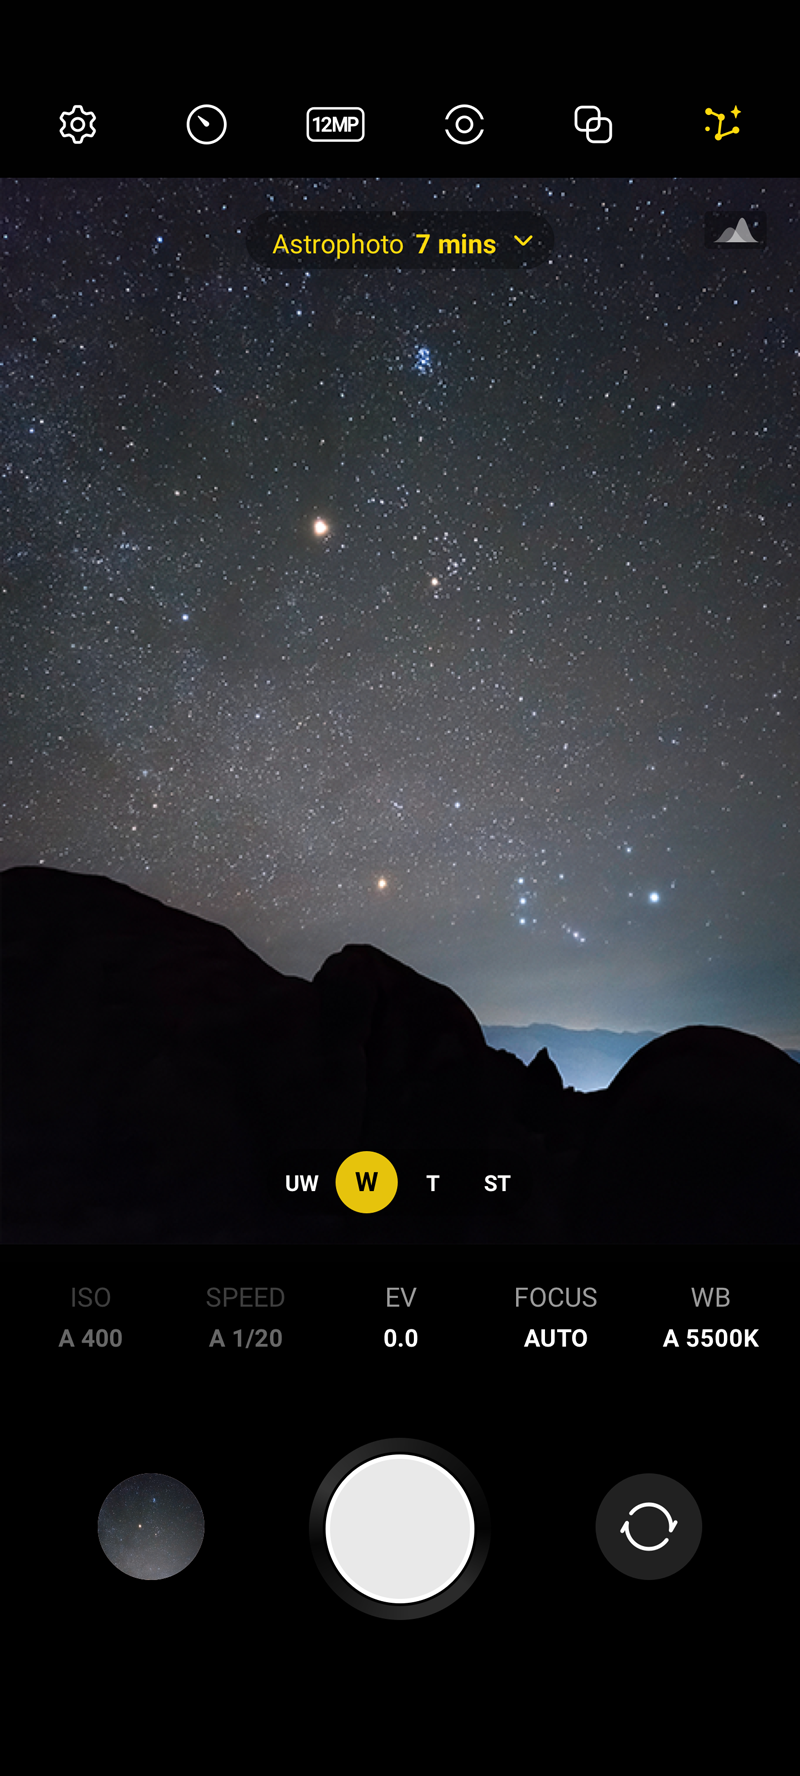 This image describes the astronomical photography using the Expert Low App.